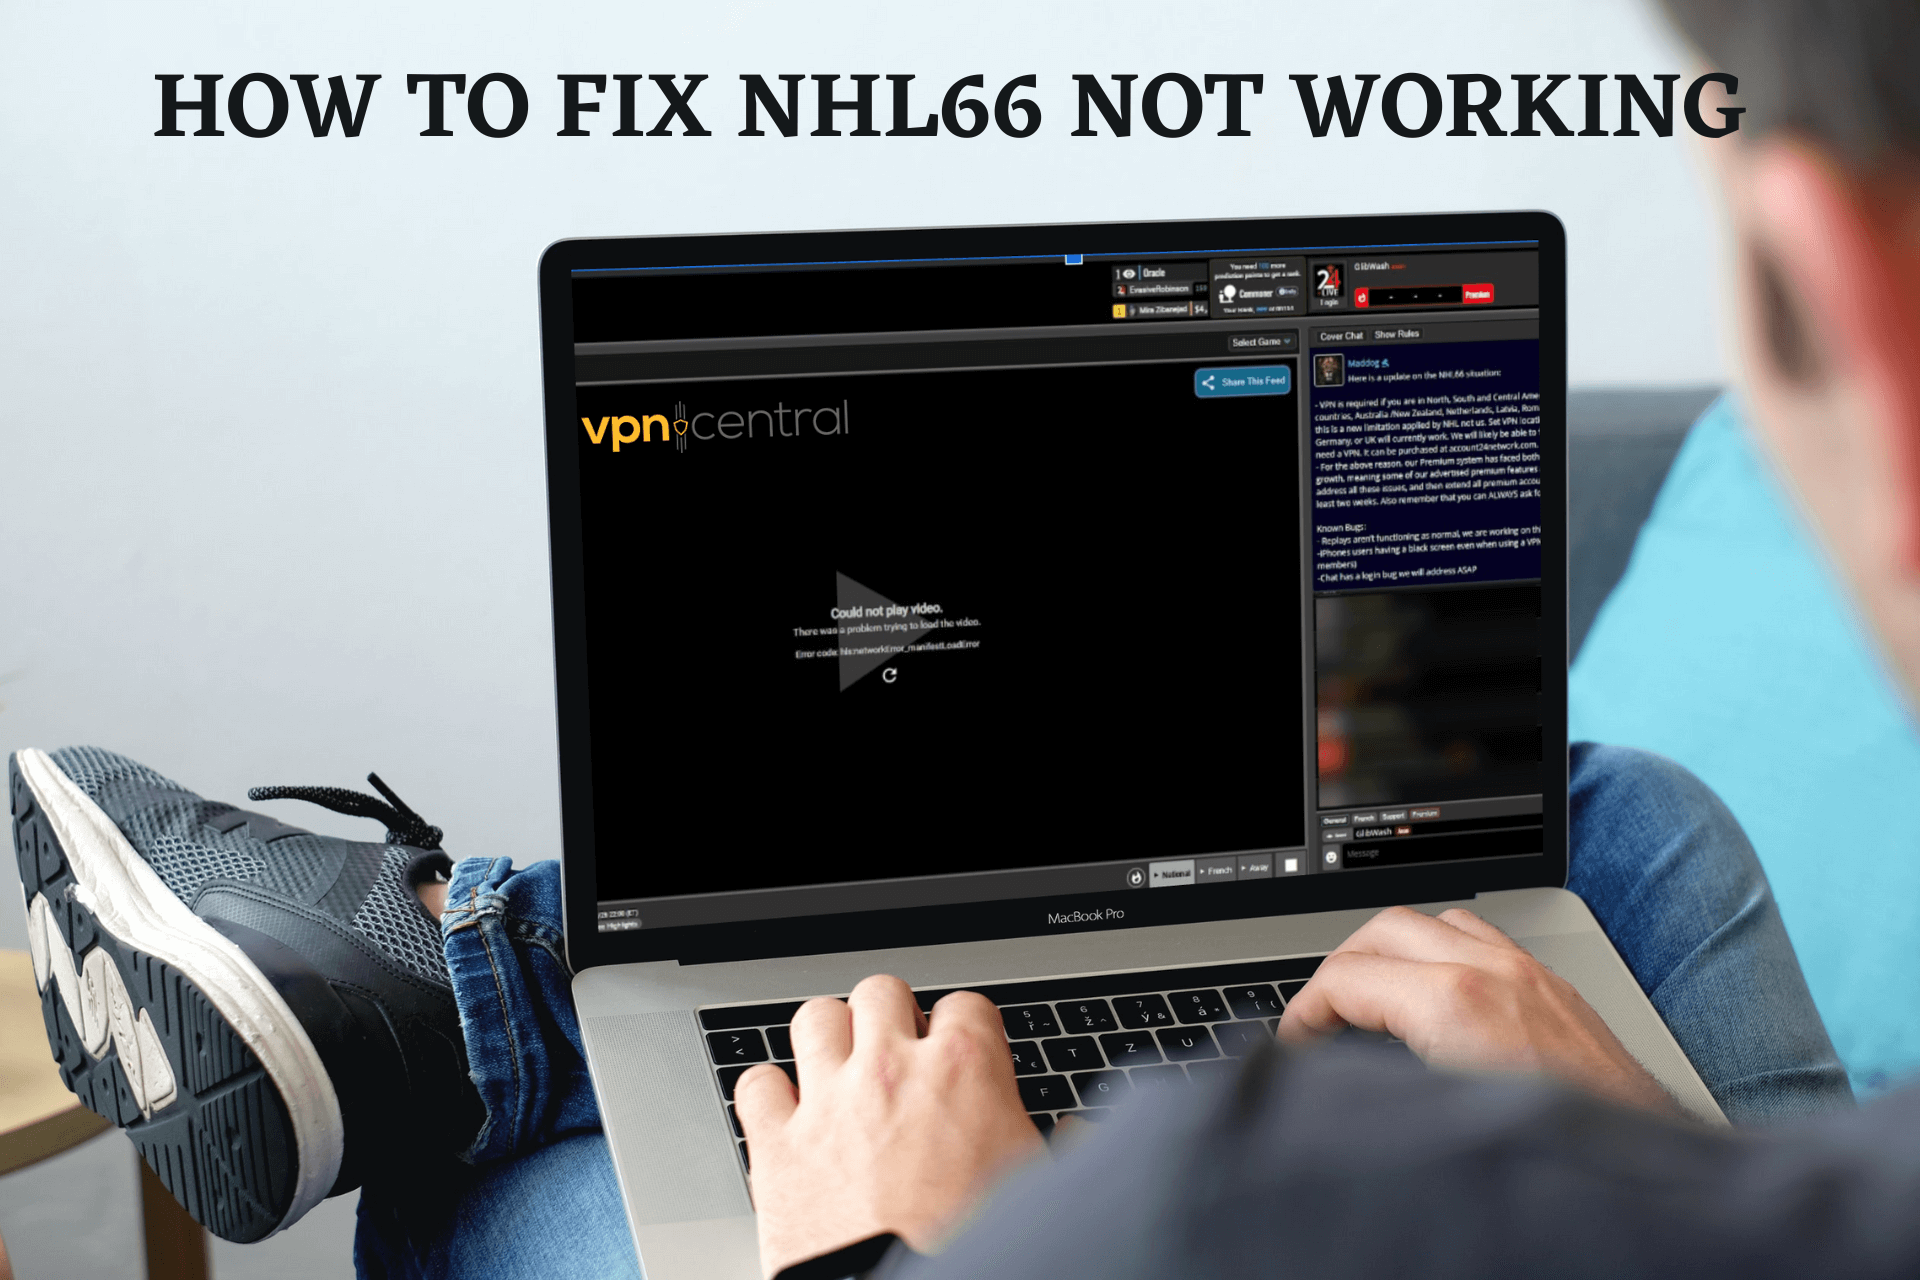 NHL66 not working